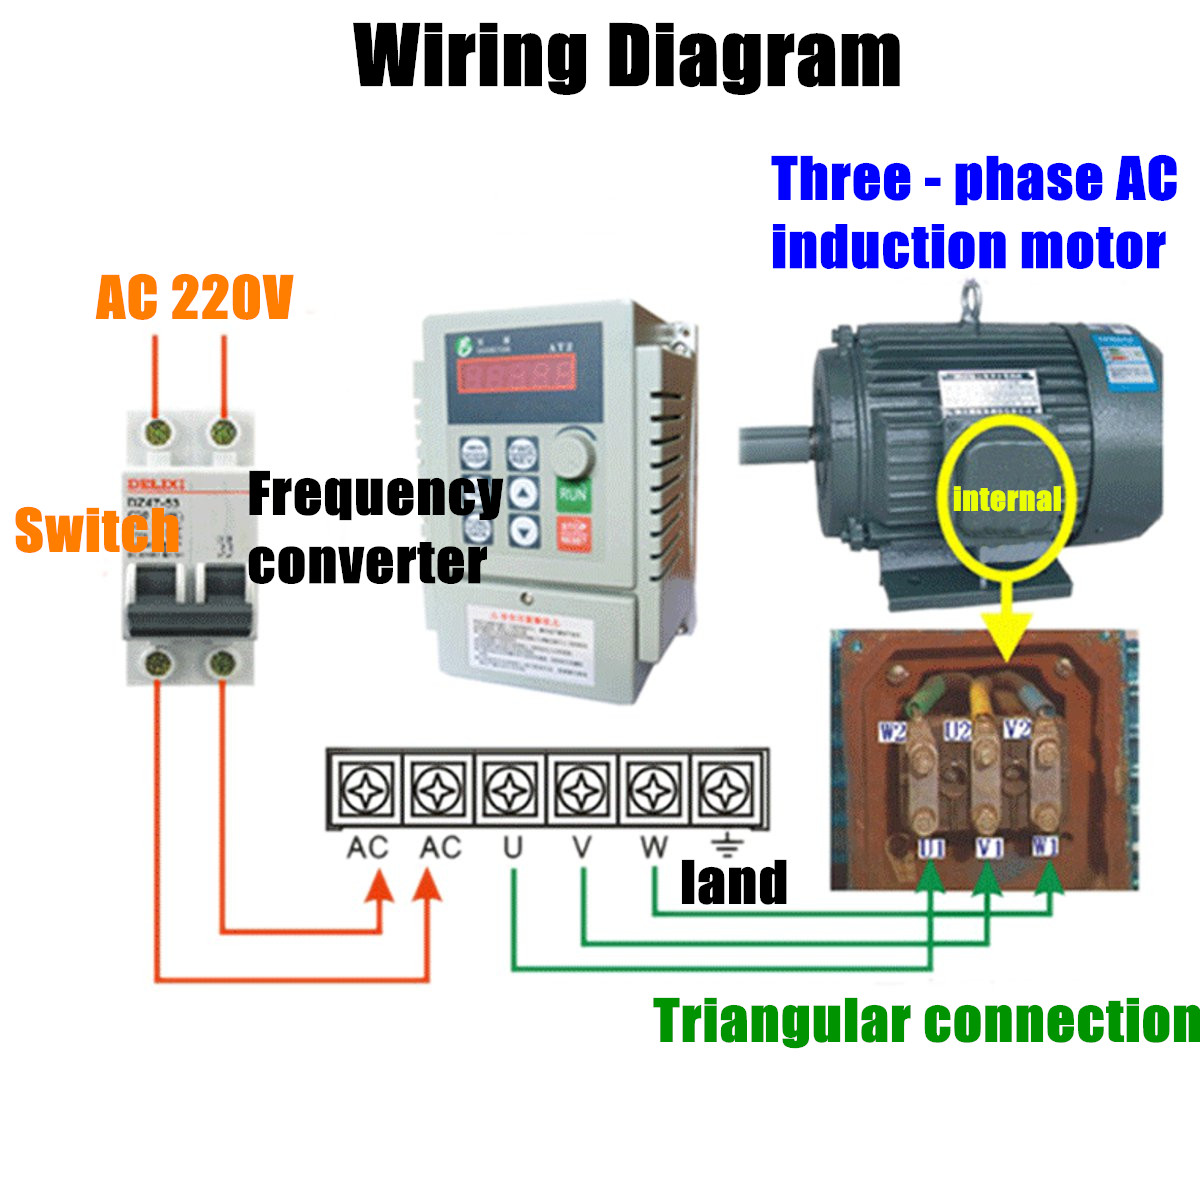 22KW-220V-12A-Single-Phase-Input-3-Phase-Output-PWM-Frequency-Converter-Drive-Inverter-VF-Vector-Con-1288332-10